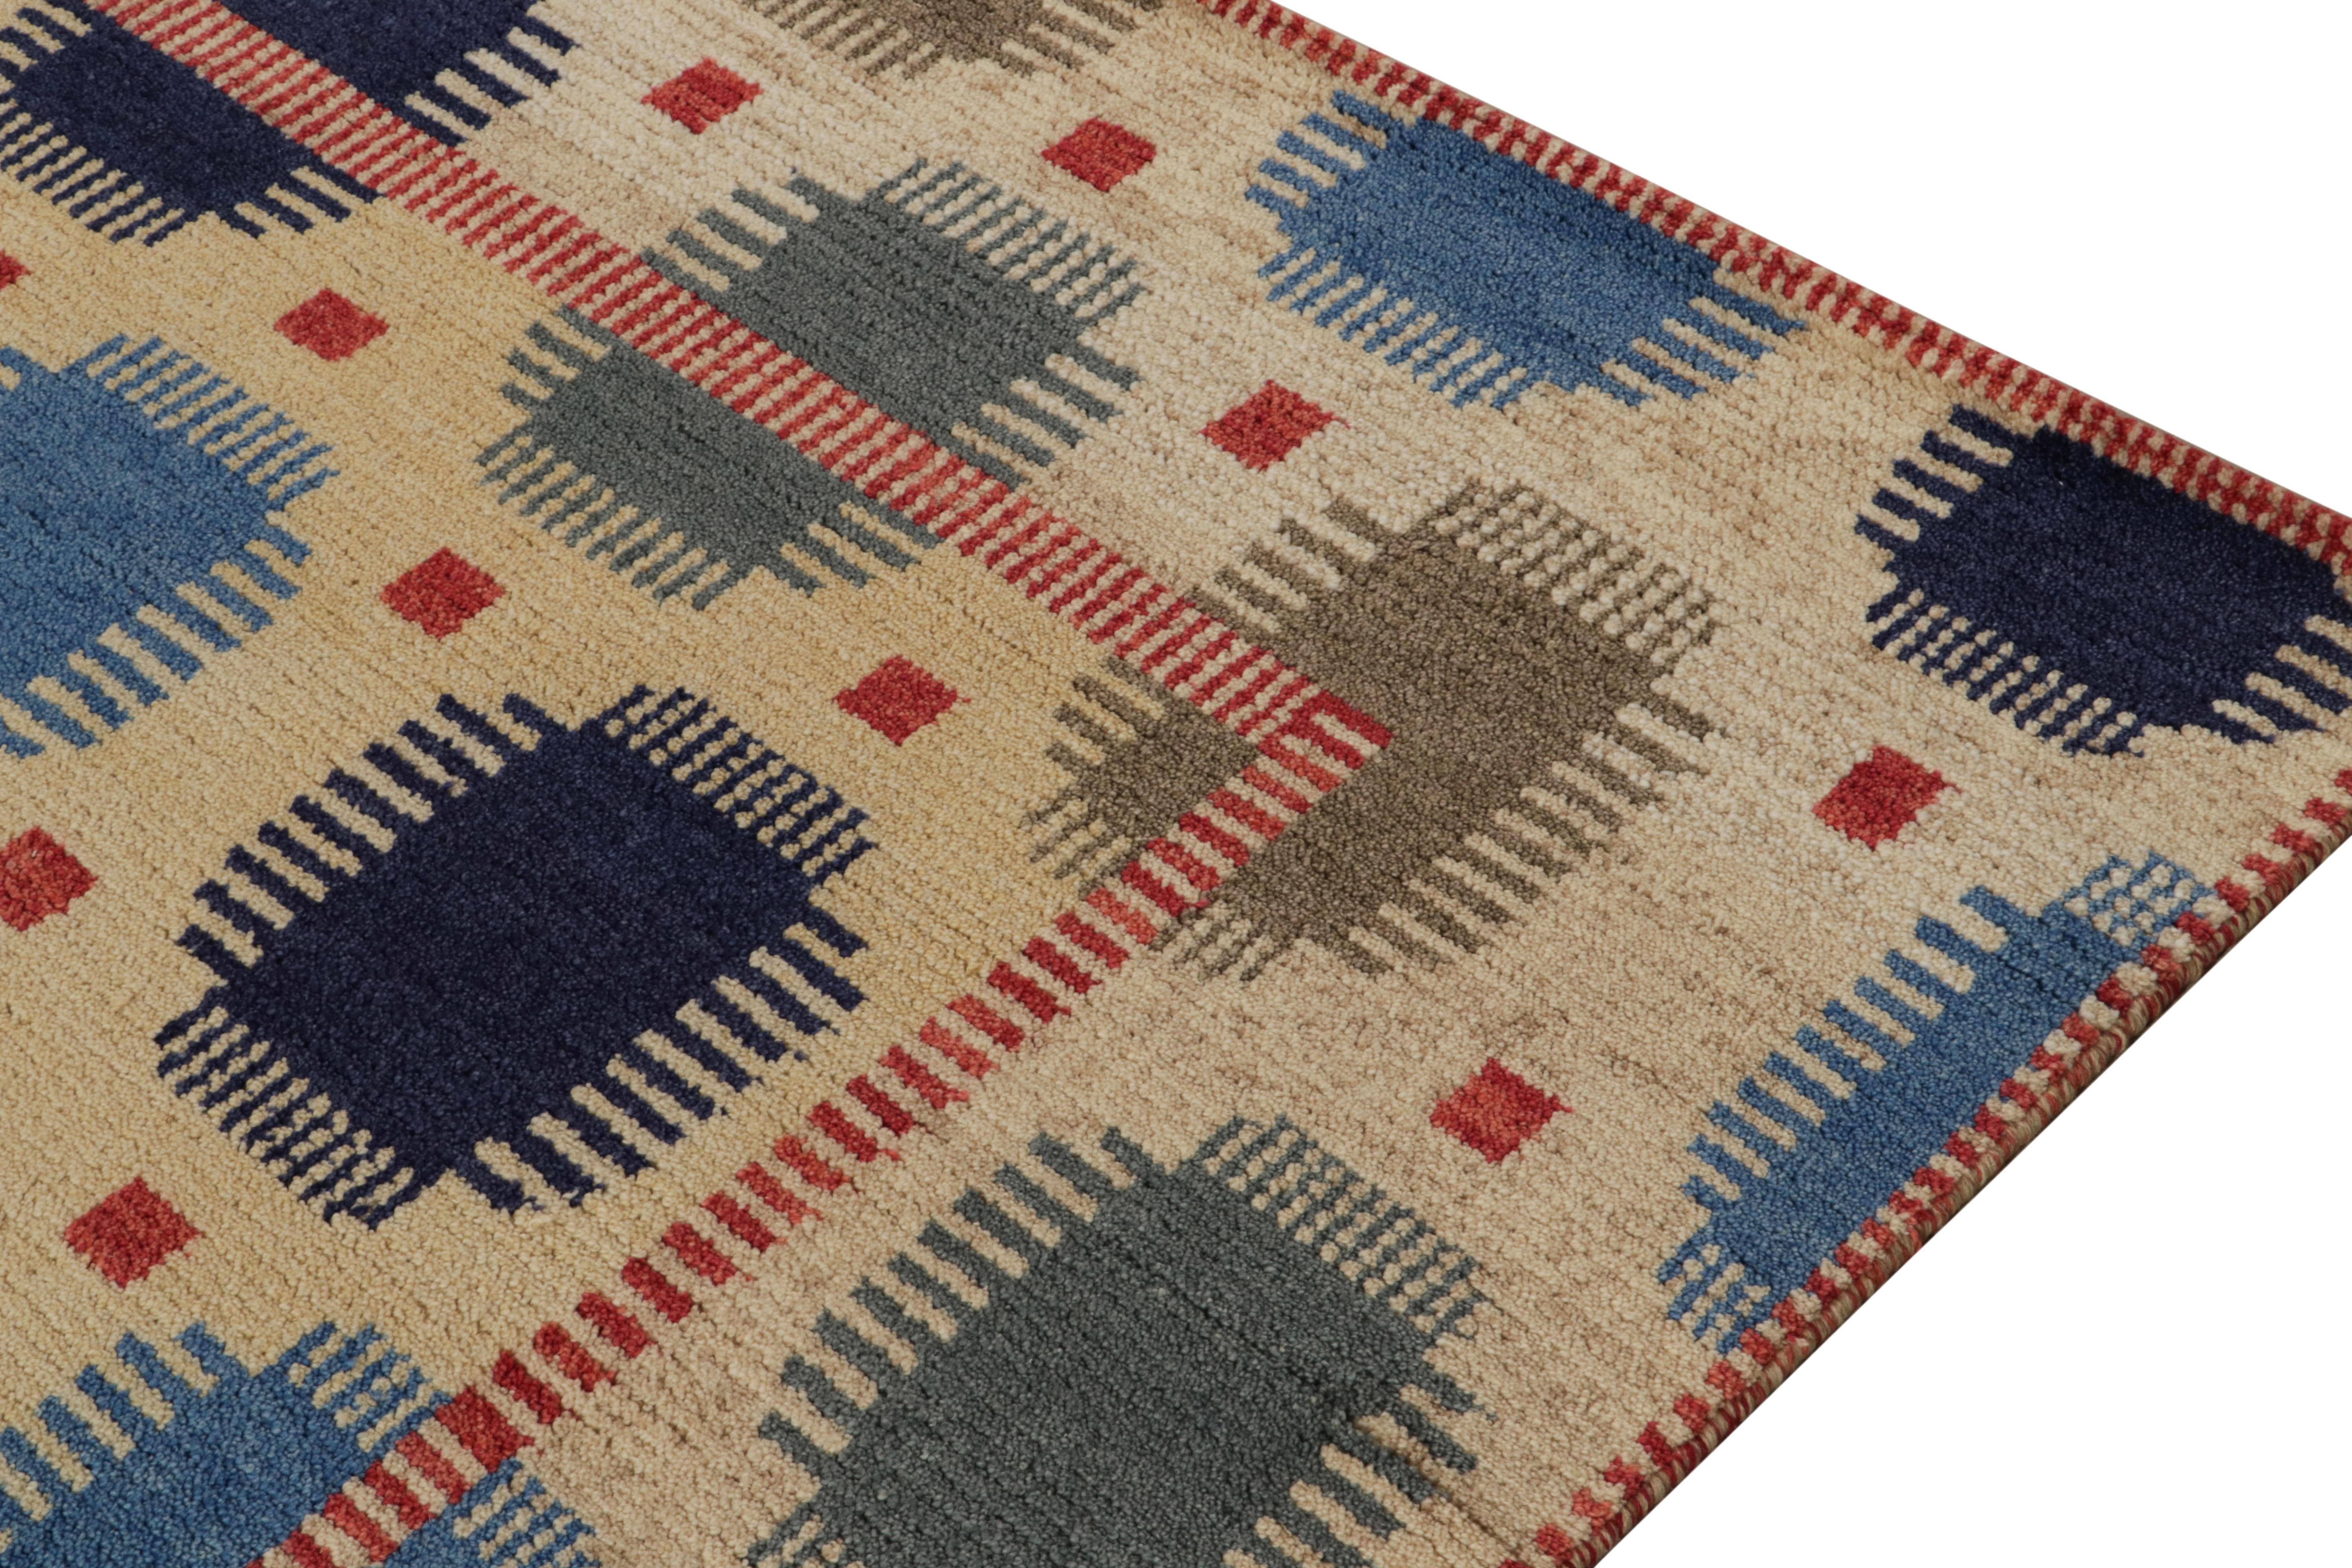 Hand-Knotted Rug & Kilim's Scandinavian Style Rug in Beige-Brown, Blue Geometric Pattern For Sale